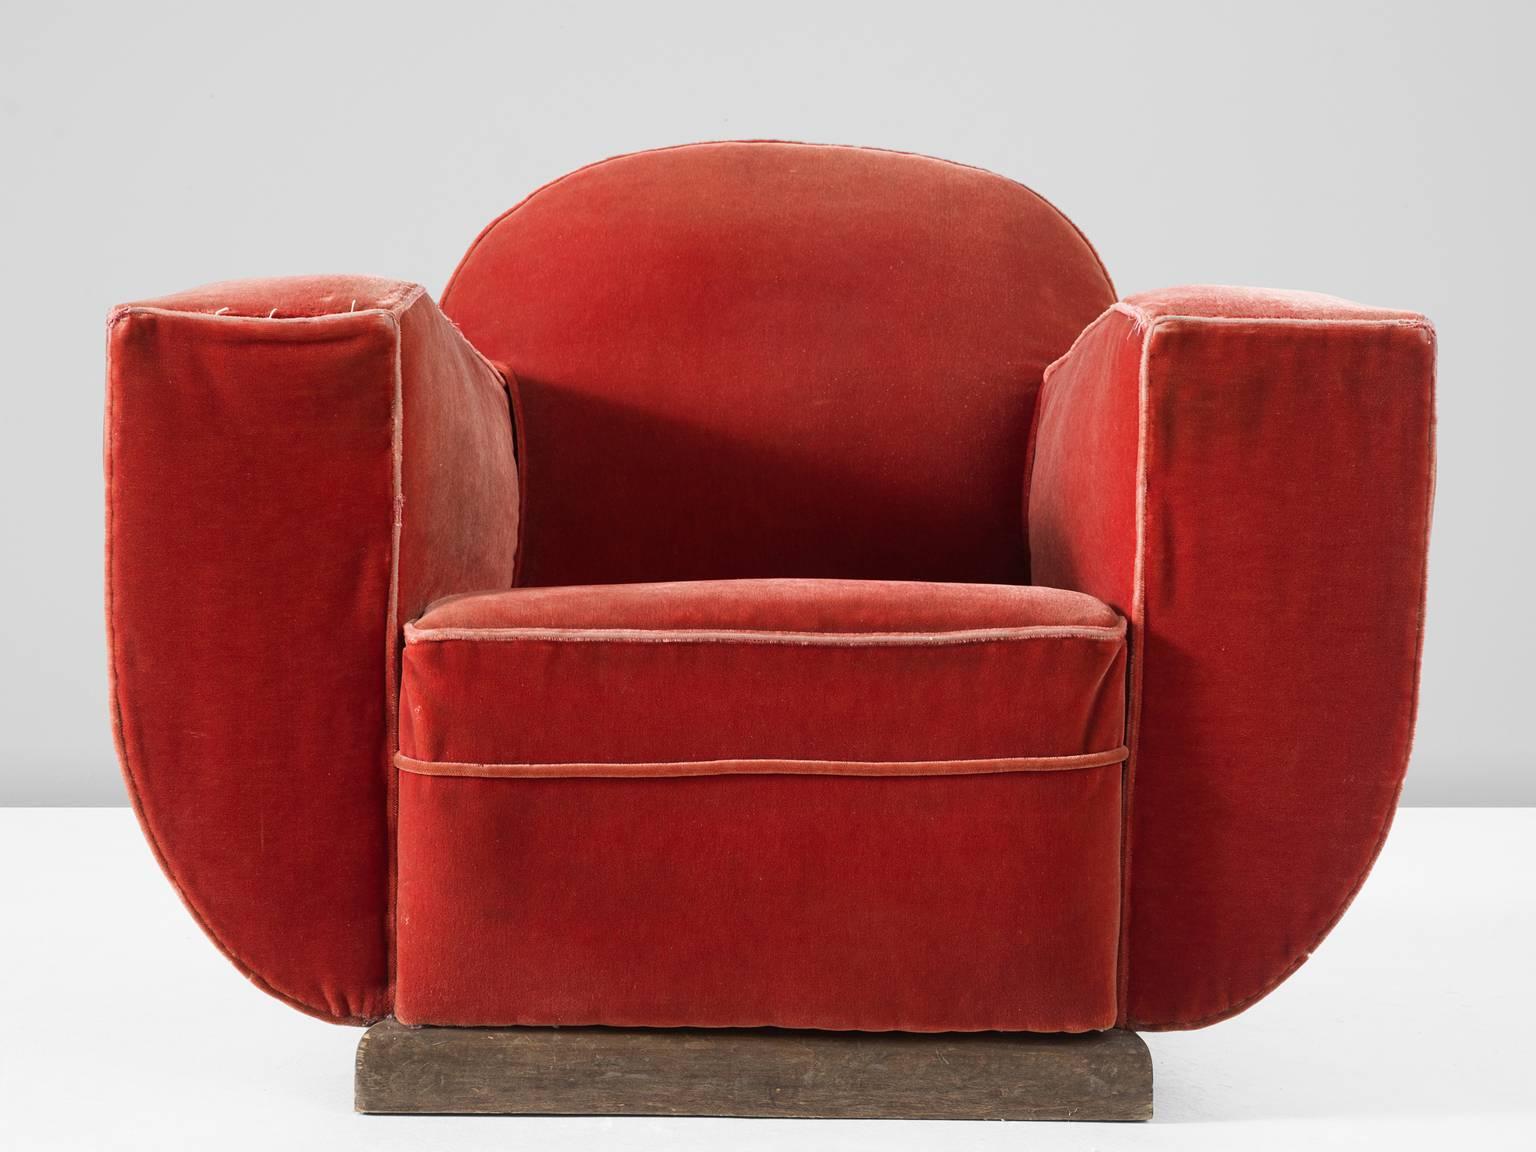 Pair of French Art Deco Club Chairs in Red Mohair Upholstery 1